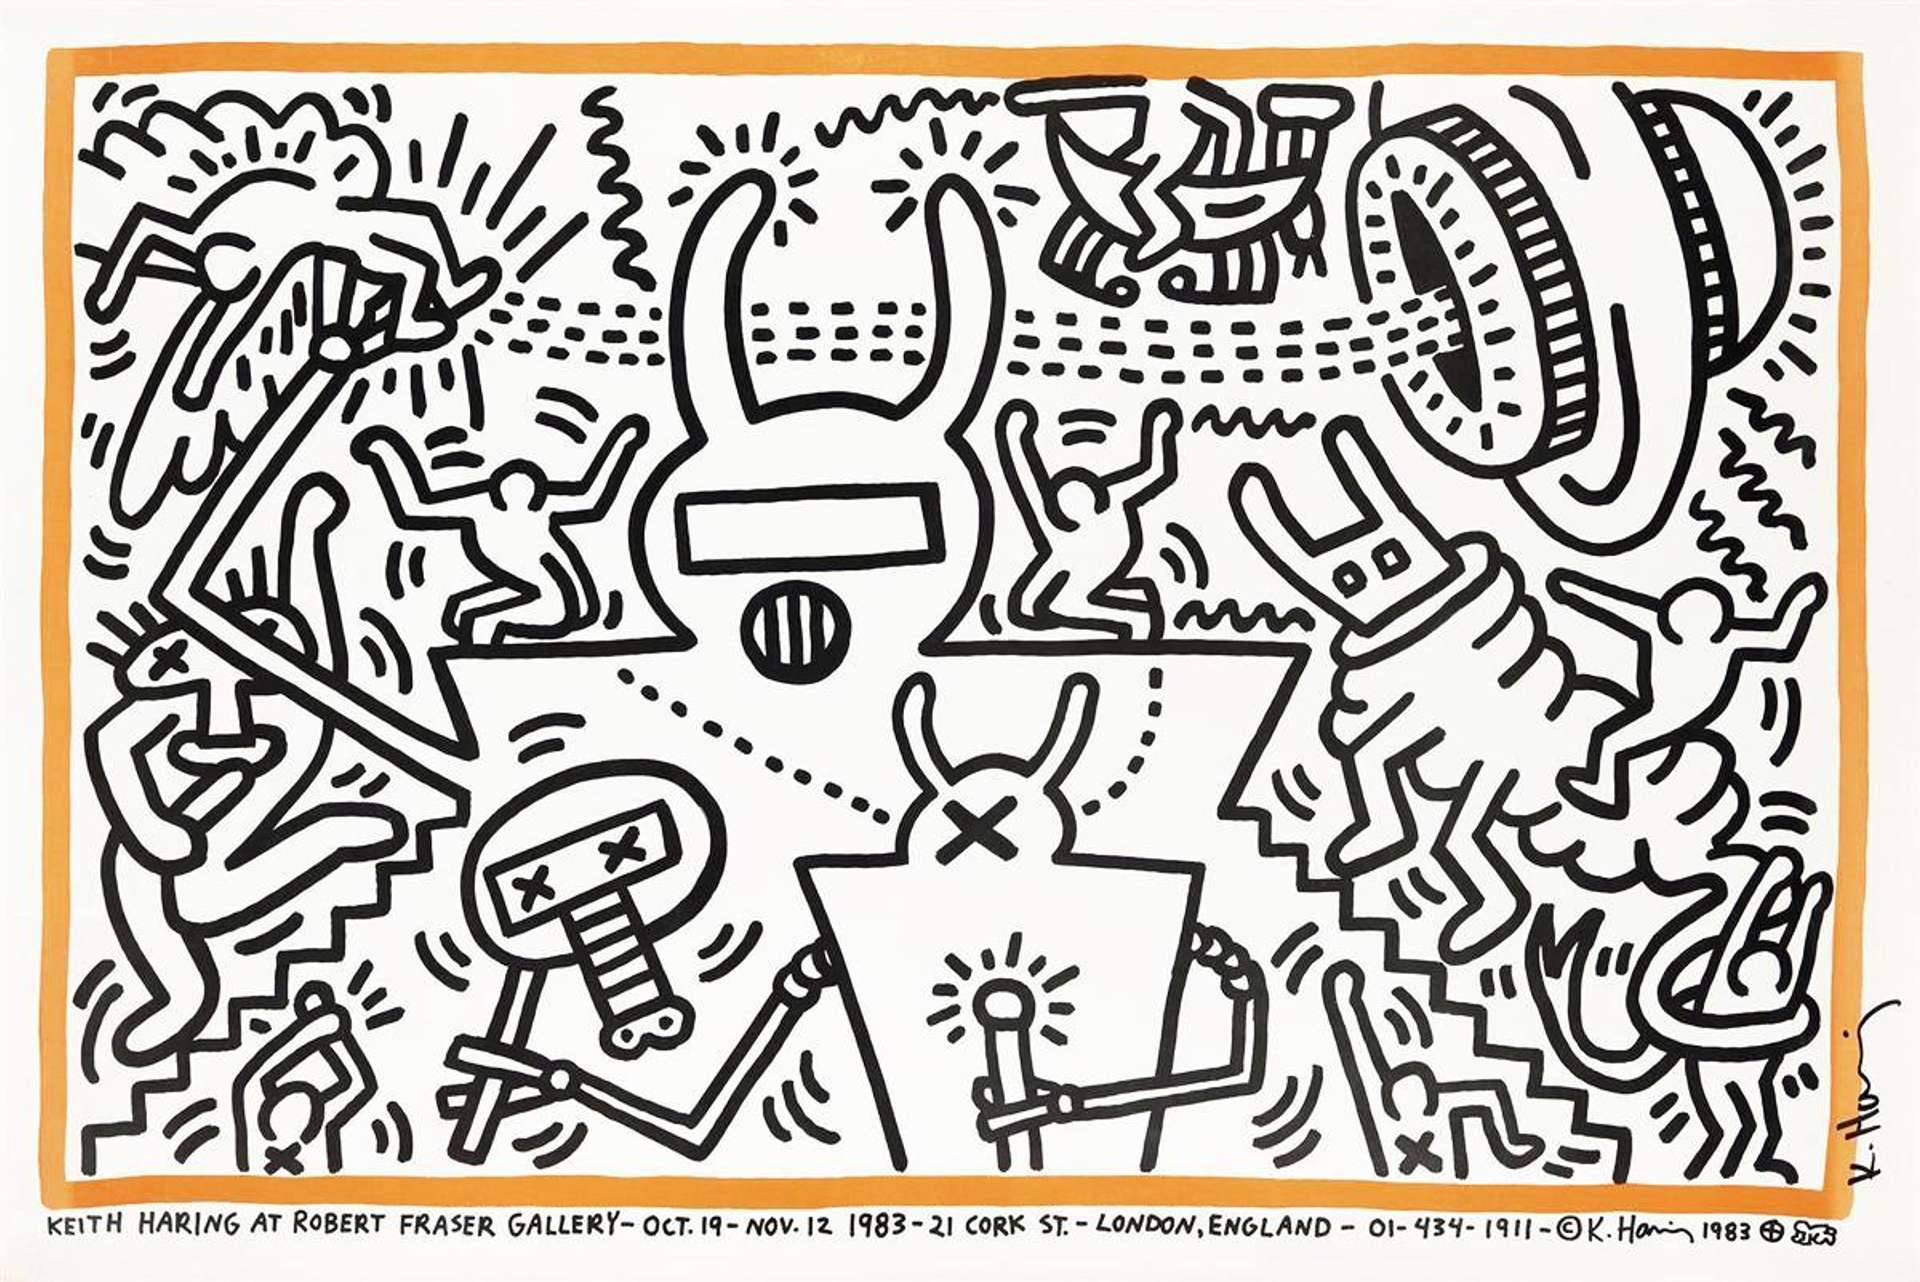 Keith Haring At Robert Fraser Gallery - Unsigned Print by Keith Haring 1983 - MyArtBroker